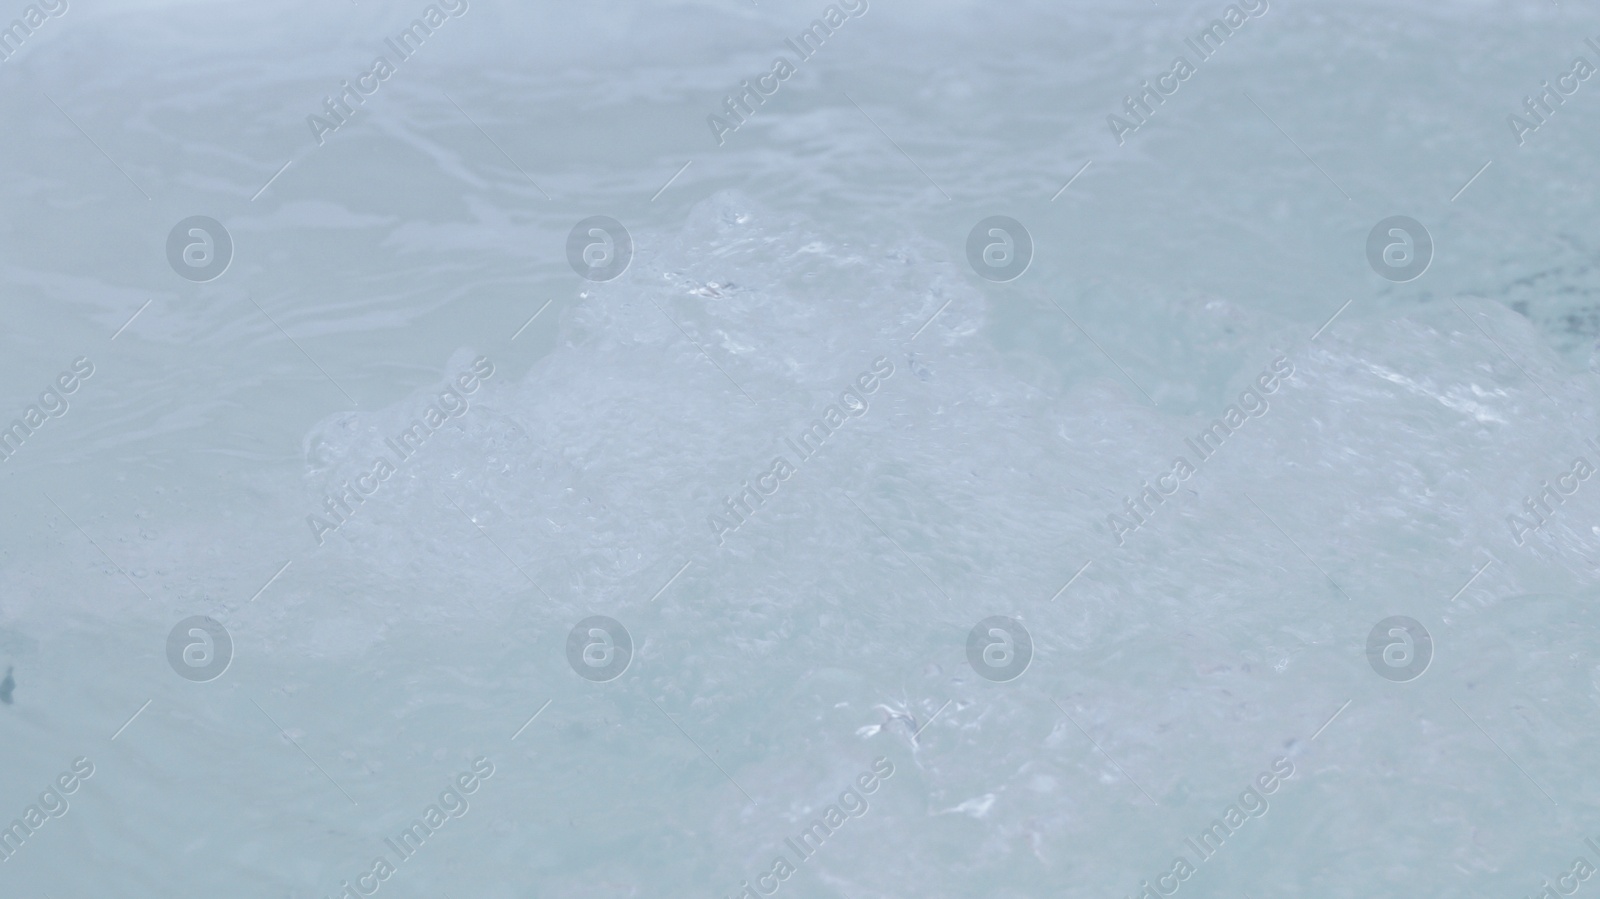 Photo of Water bubbling in hot tub, closeup view